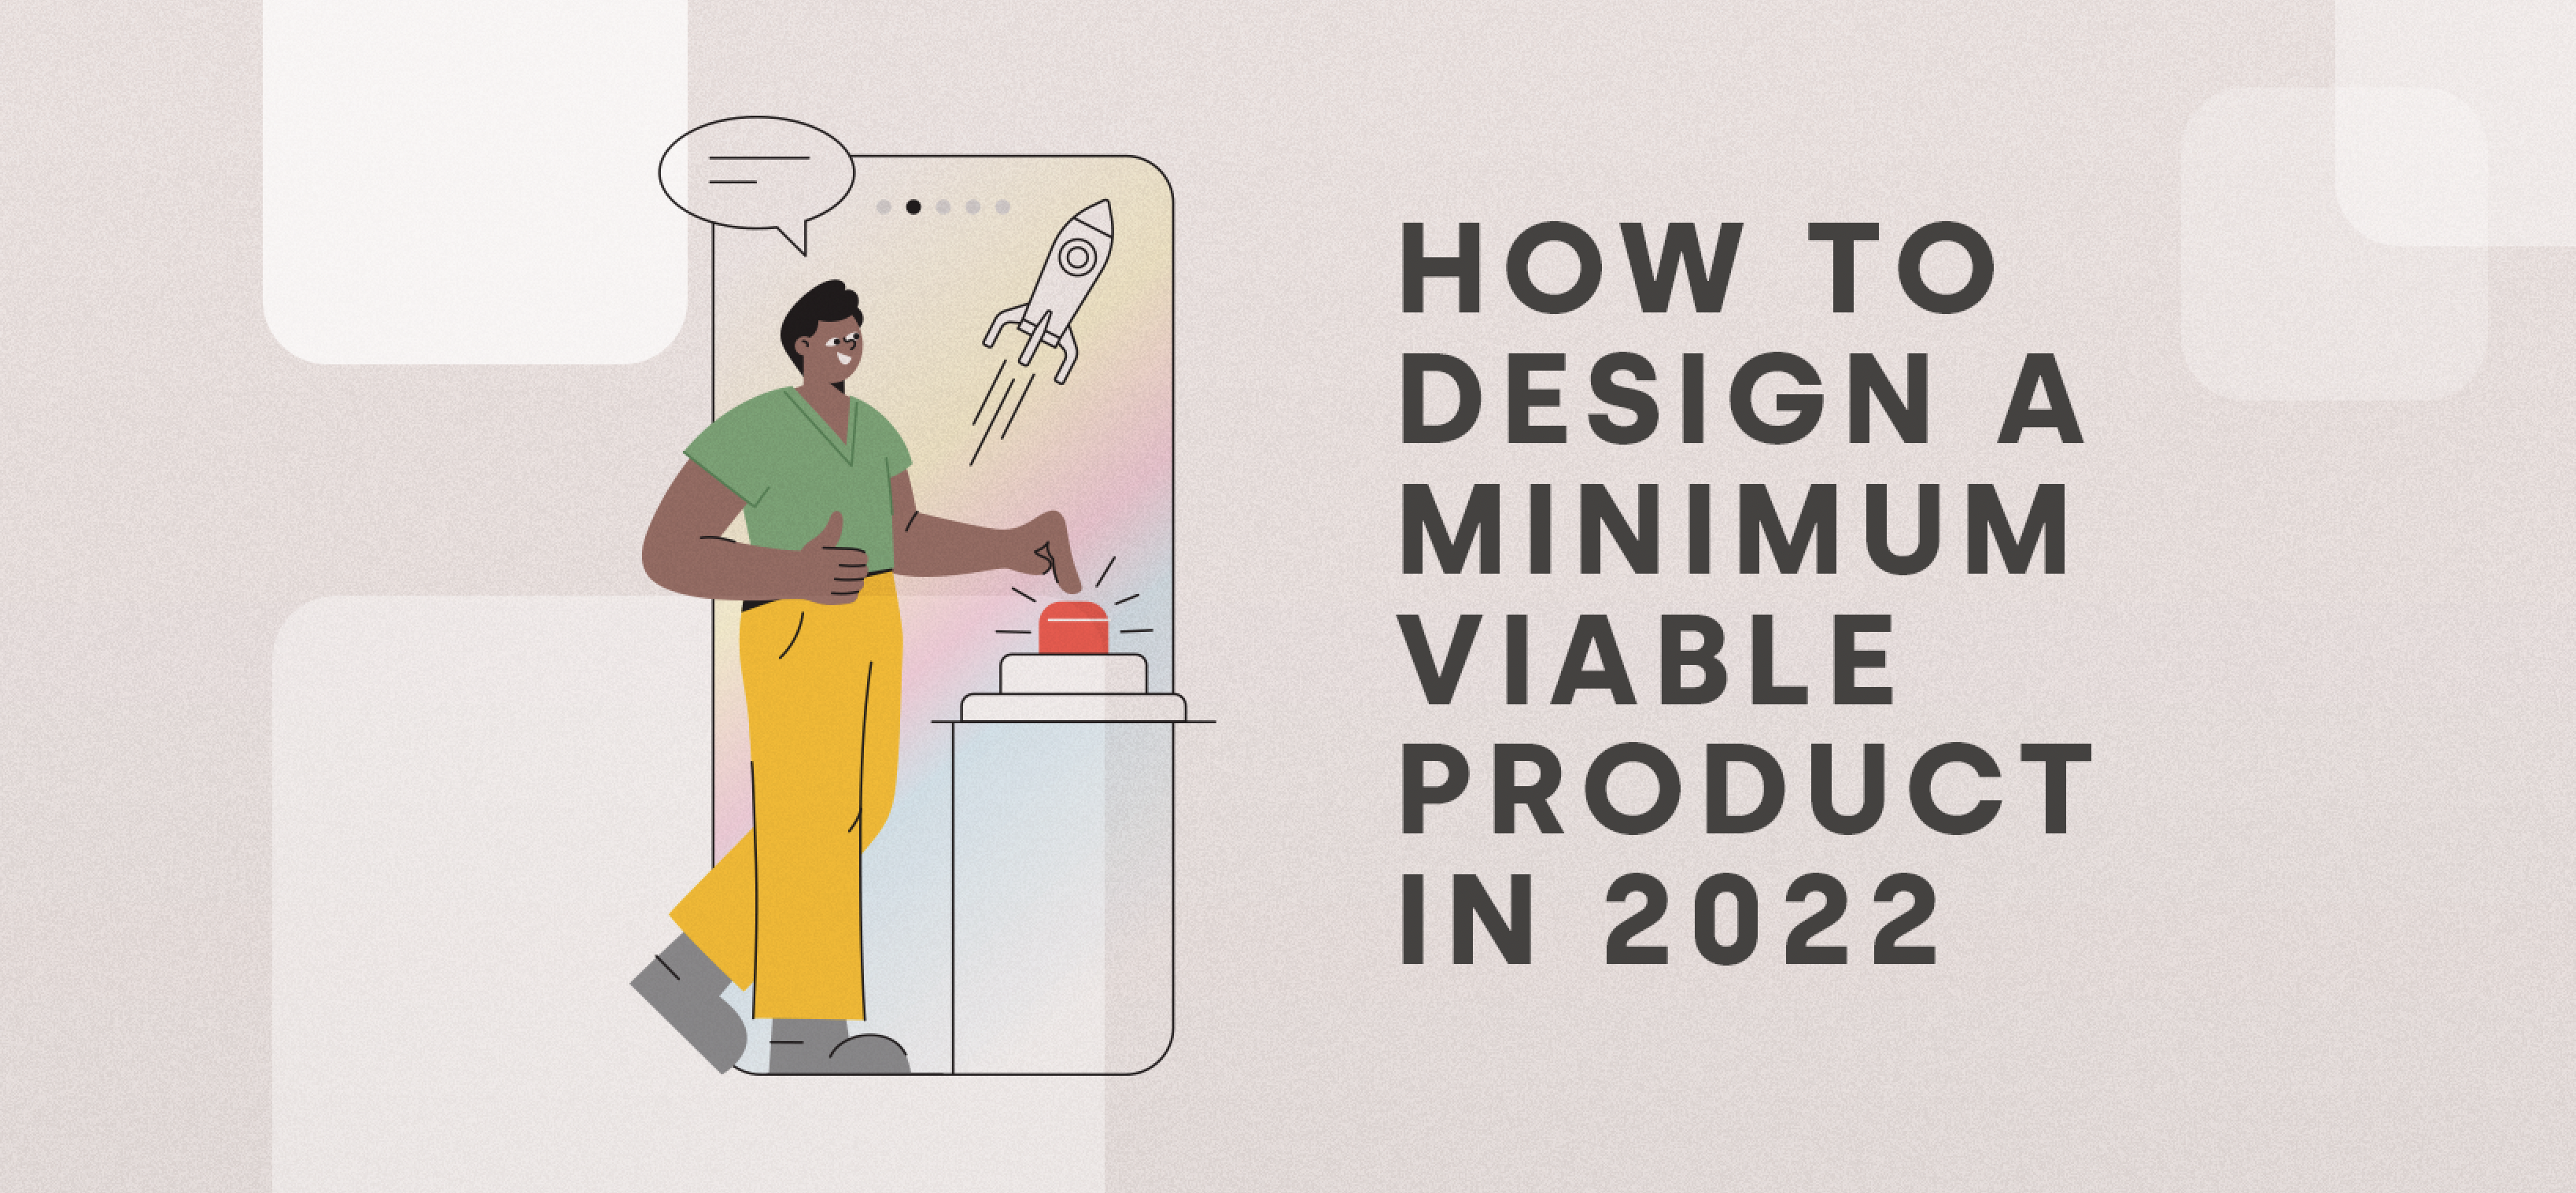 How to design a minimum viable product in 2022